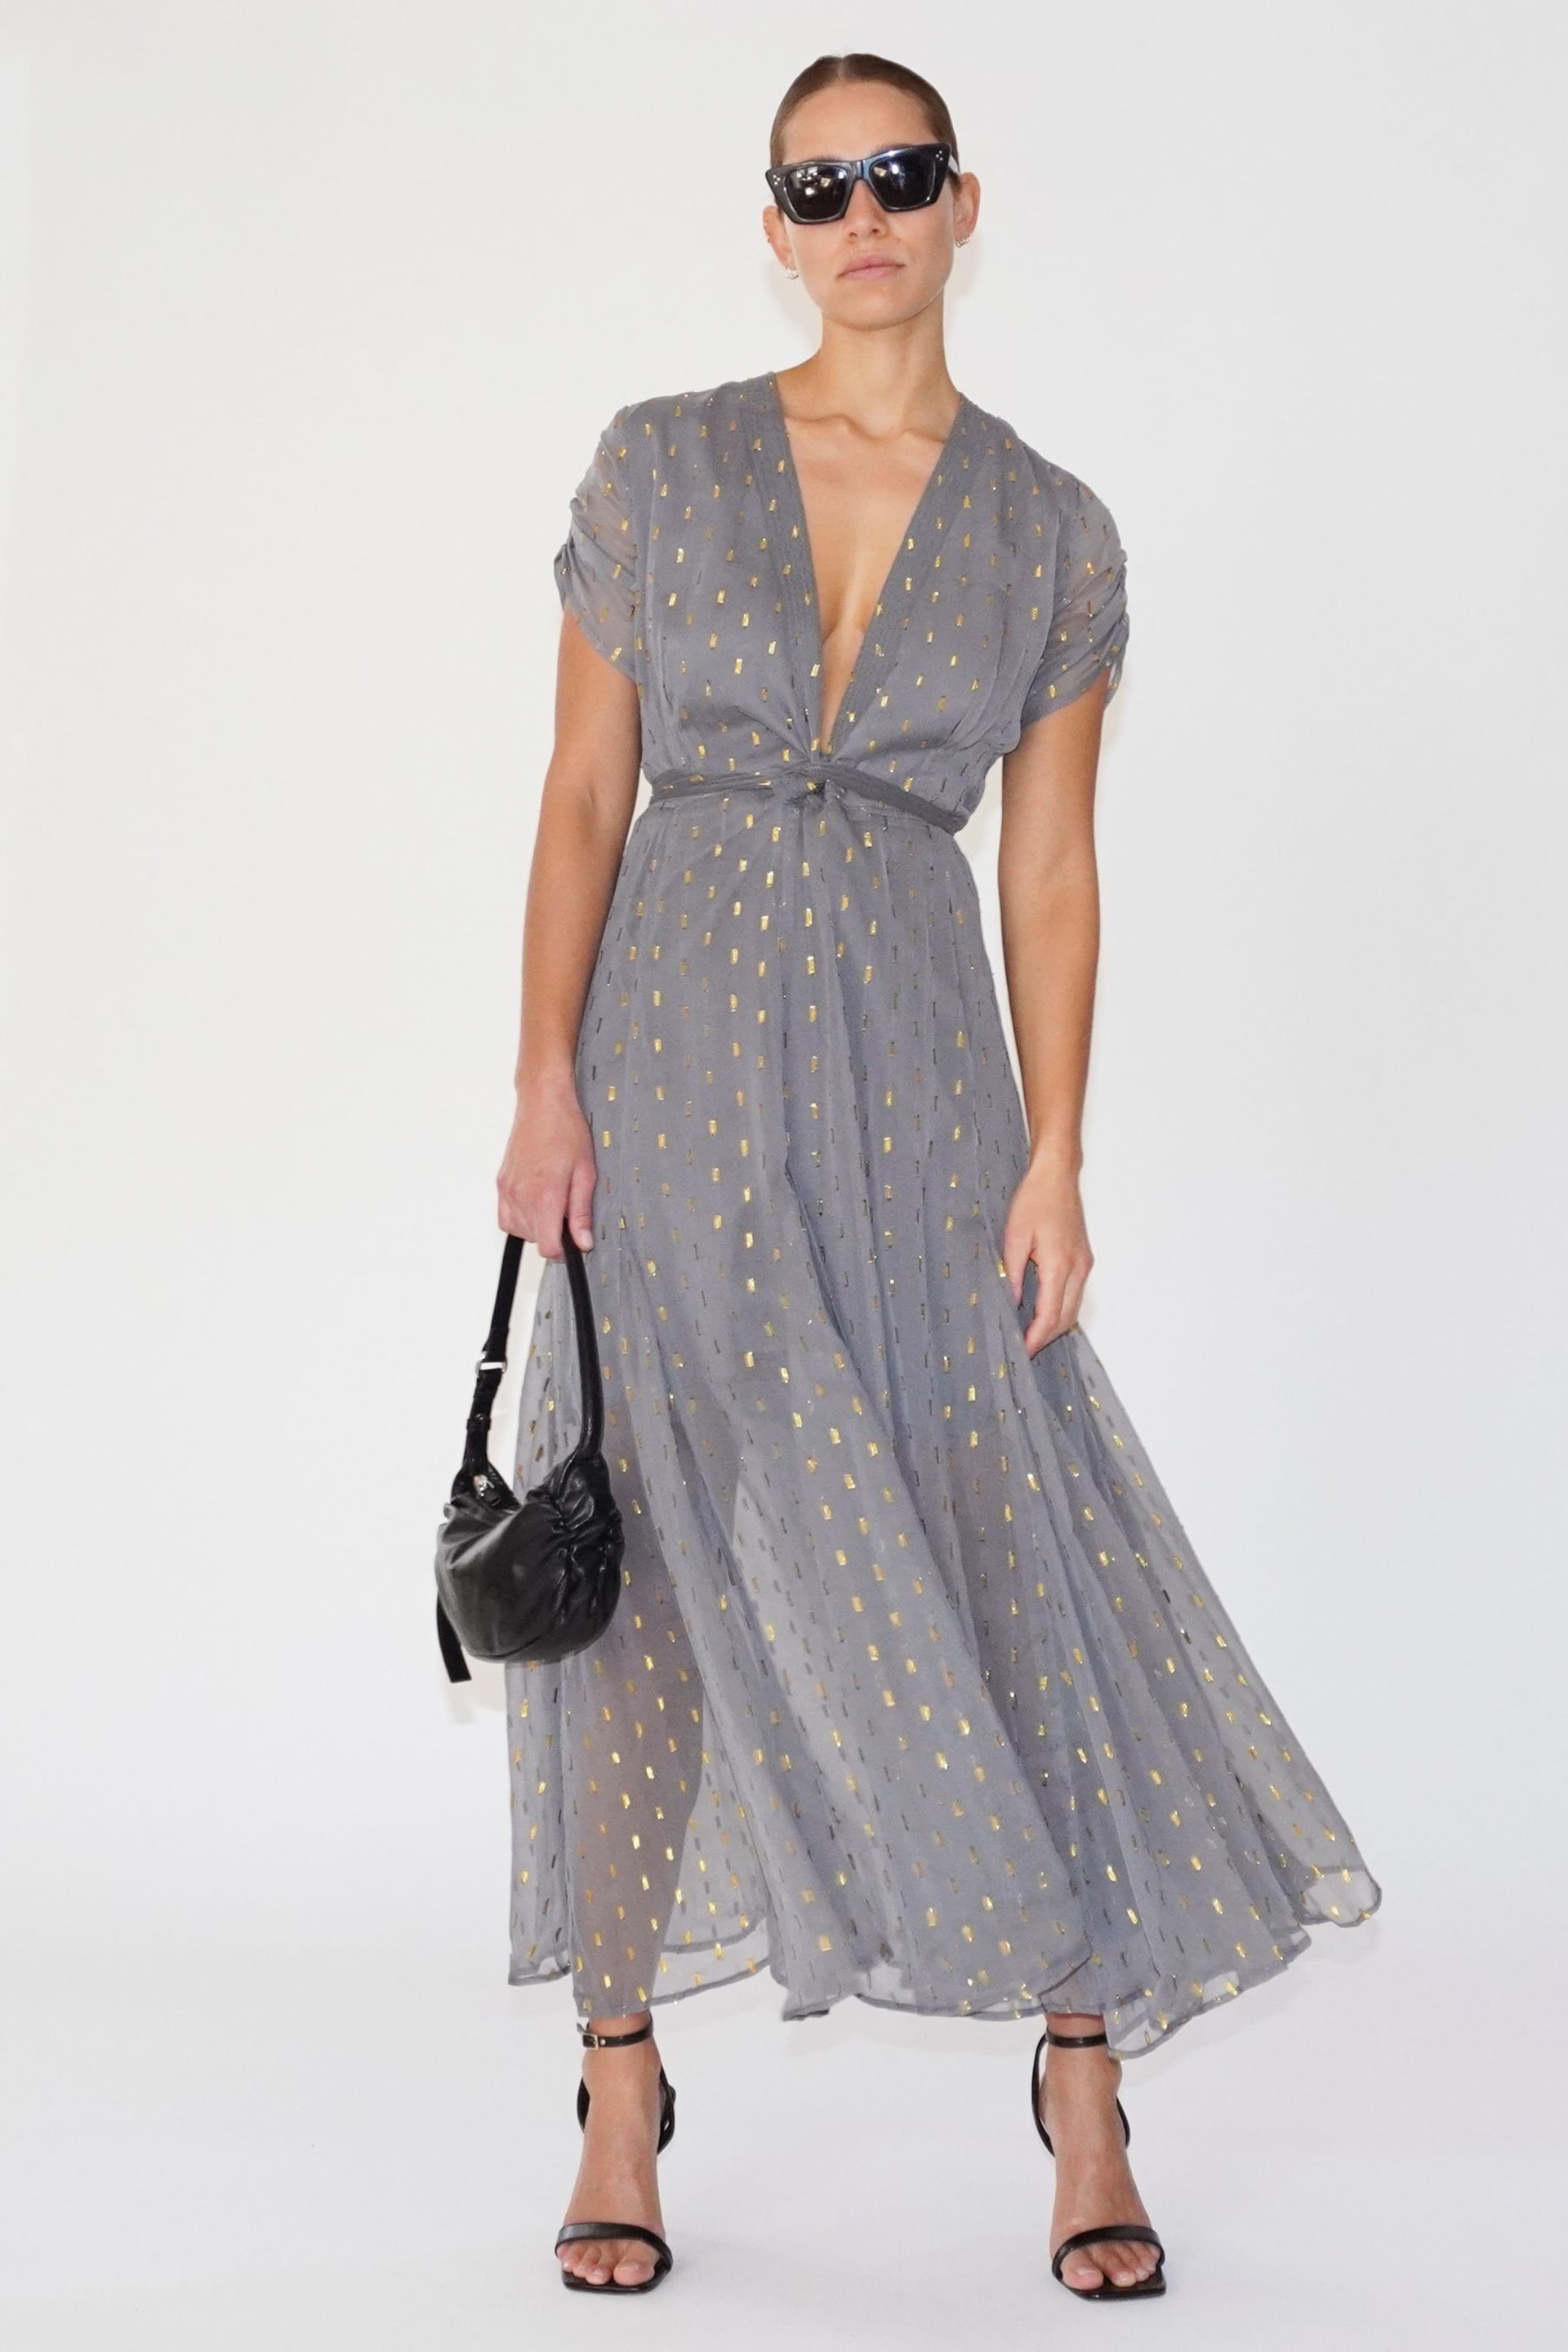 Religion Grey Wrap Maxi Dress With Full Skirt In Grey Dot On Grey - Image 4 of 6